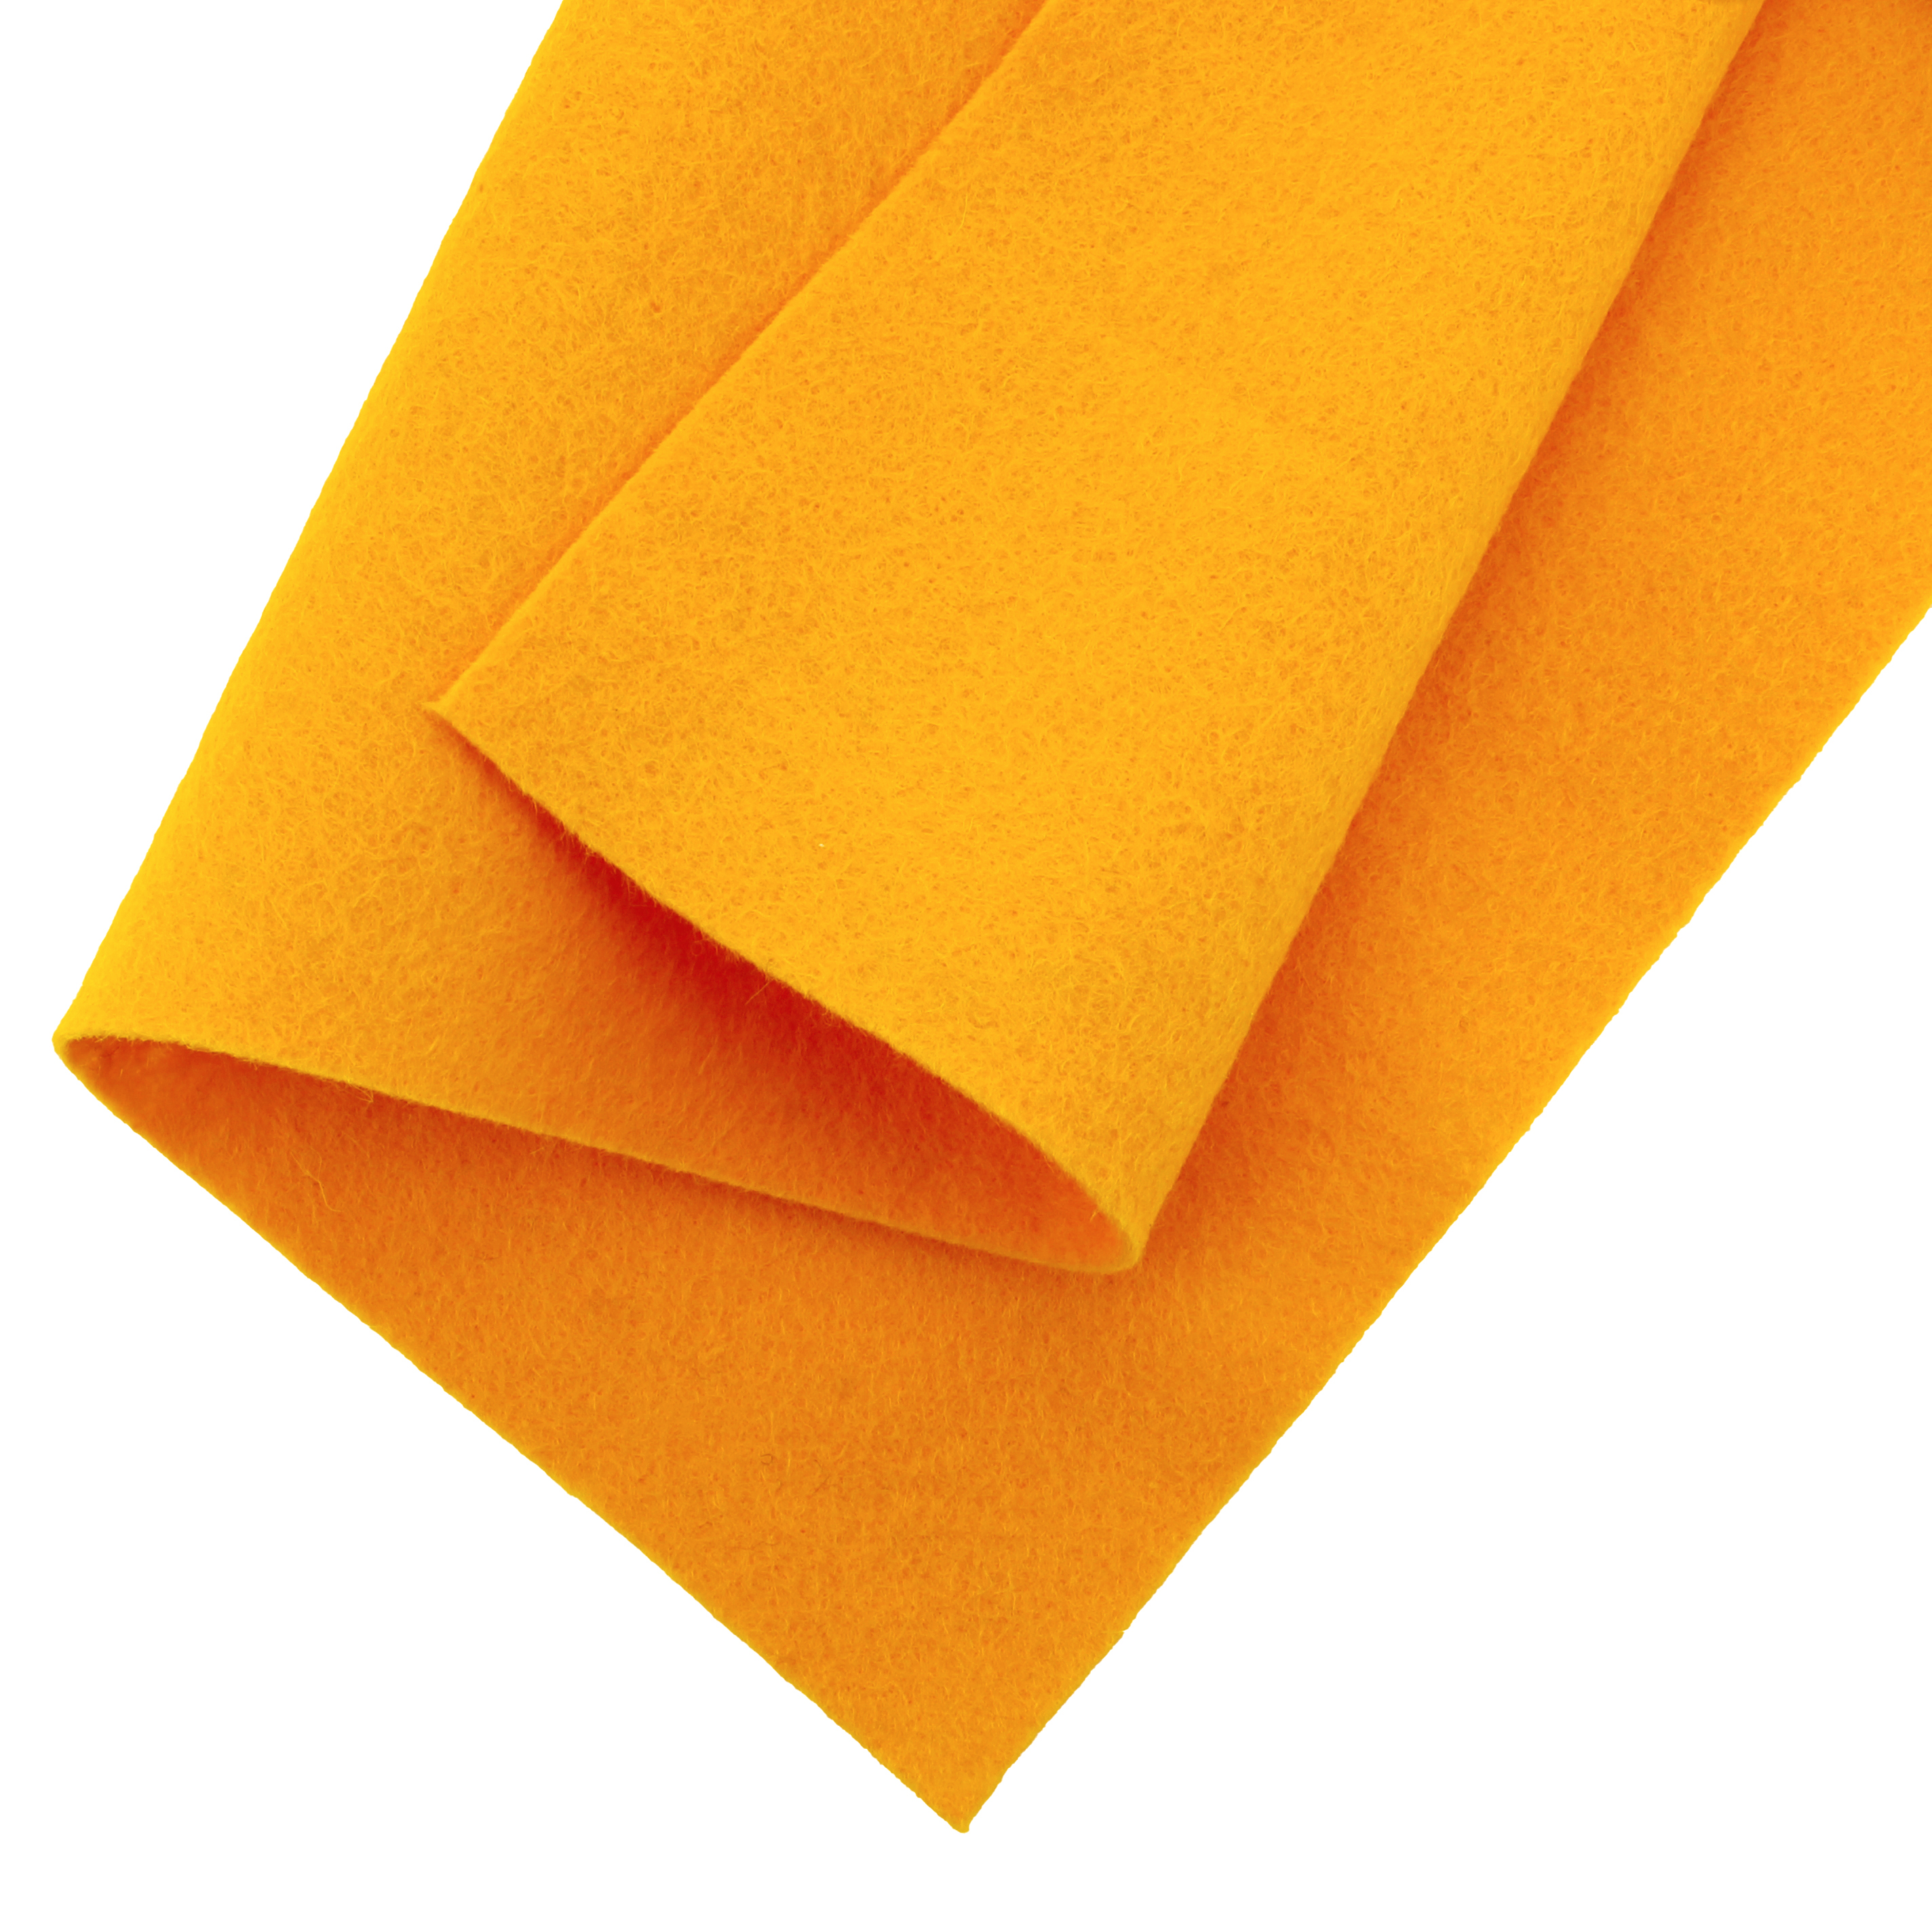 Hairbow Center Merino Wool Blend Felt Crafting Sheets ( 8 5/8 inch x 11 5/8 inch) - Yellow Gold, Size: 1.5